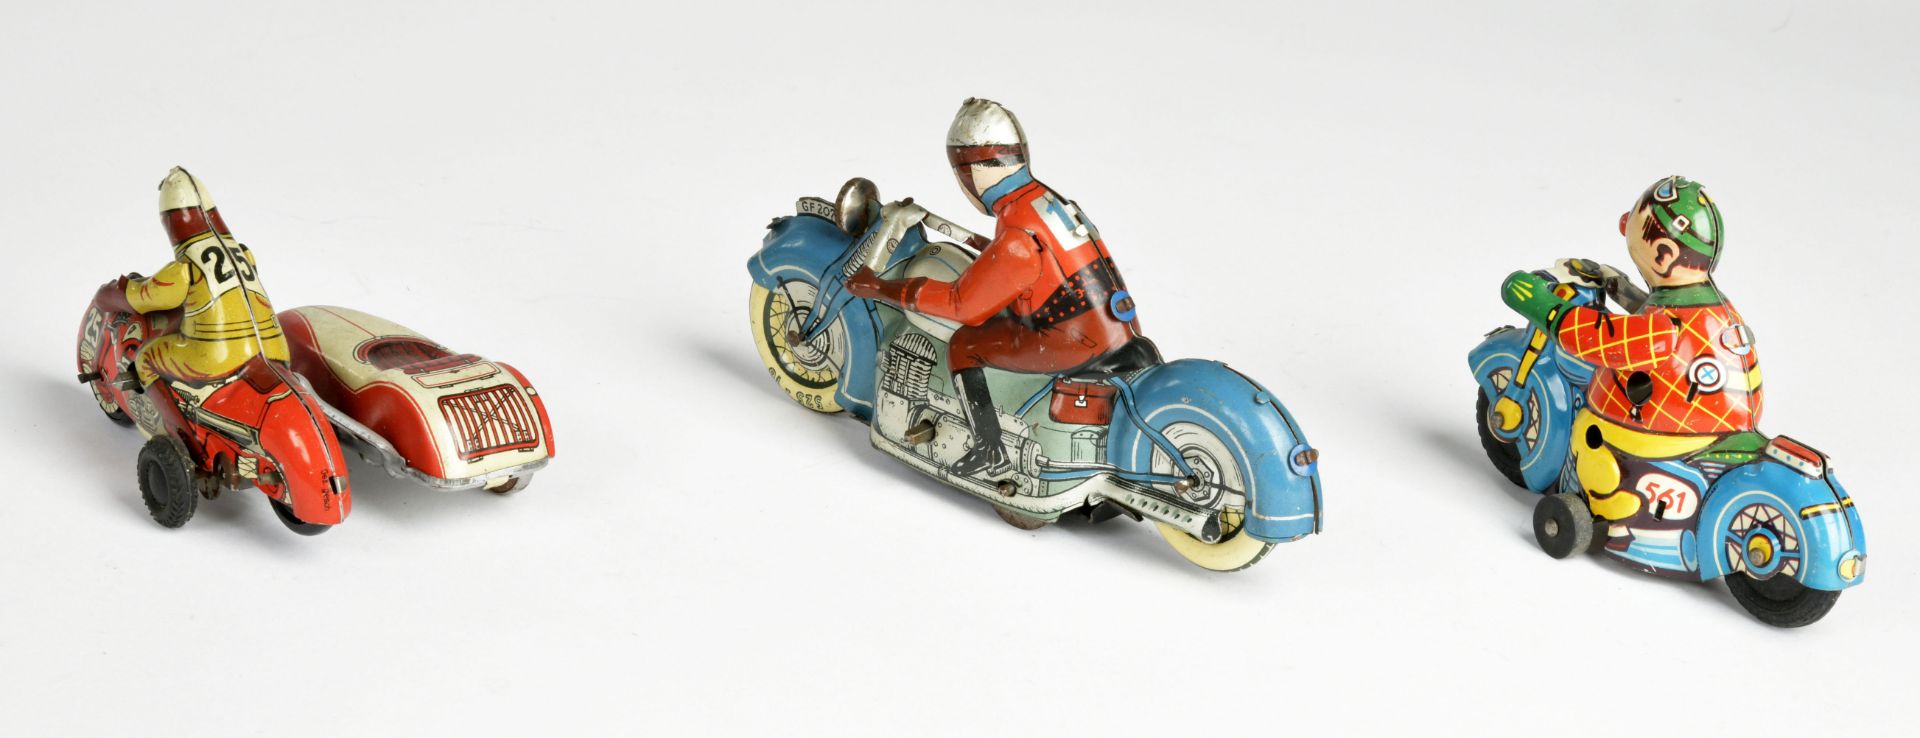 Fischer a.o., 3 motorcycles, W.-Germany, 10-13cm, tin, C 1-2 - Image 2 of 3